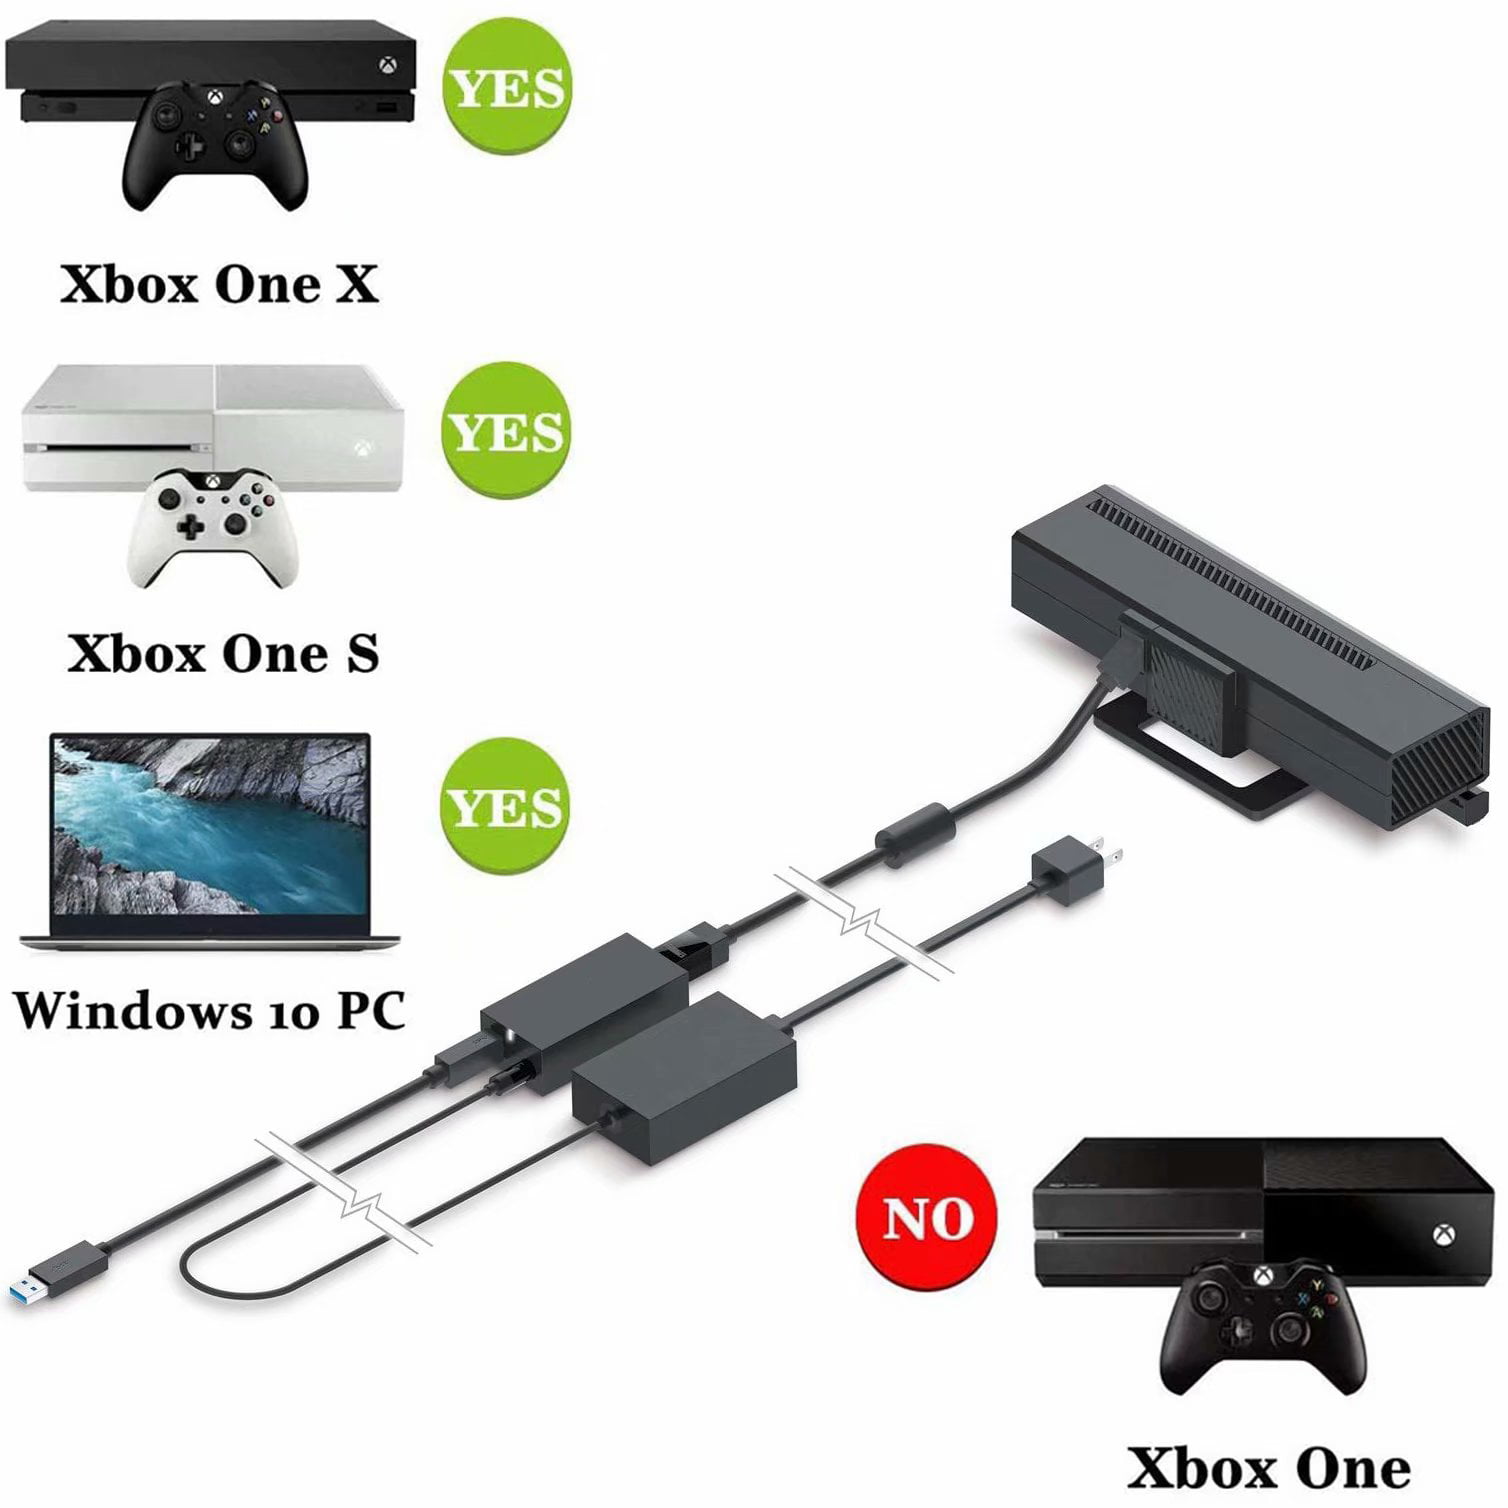 Xbox One Kinect Adapter, Windows 8  PC Adapter Power Supply for